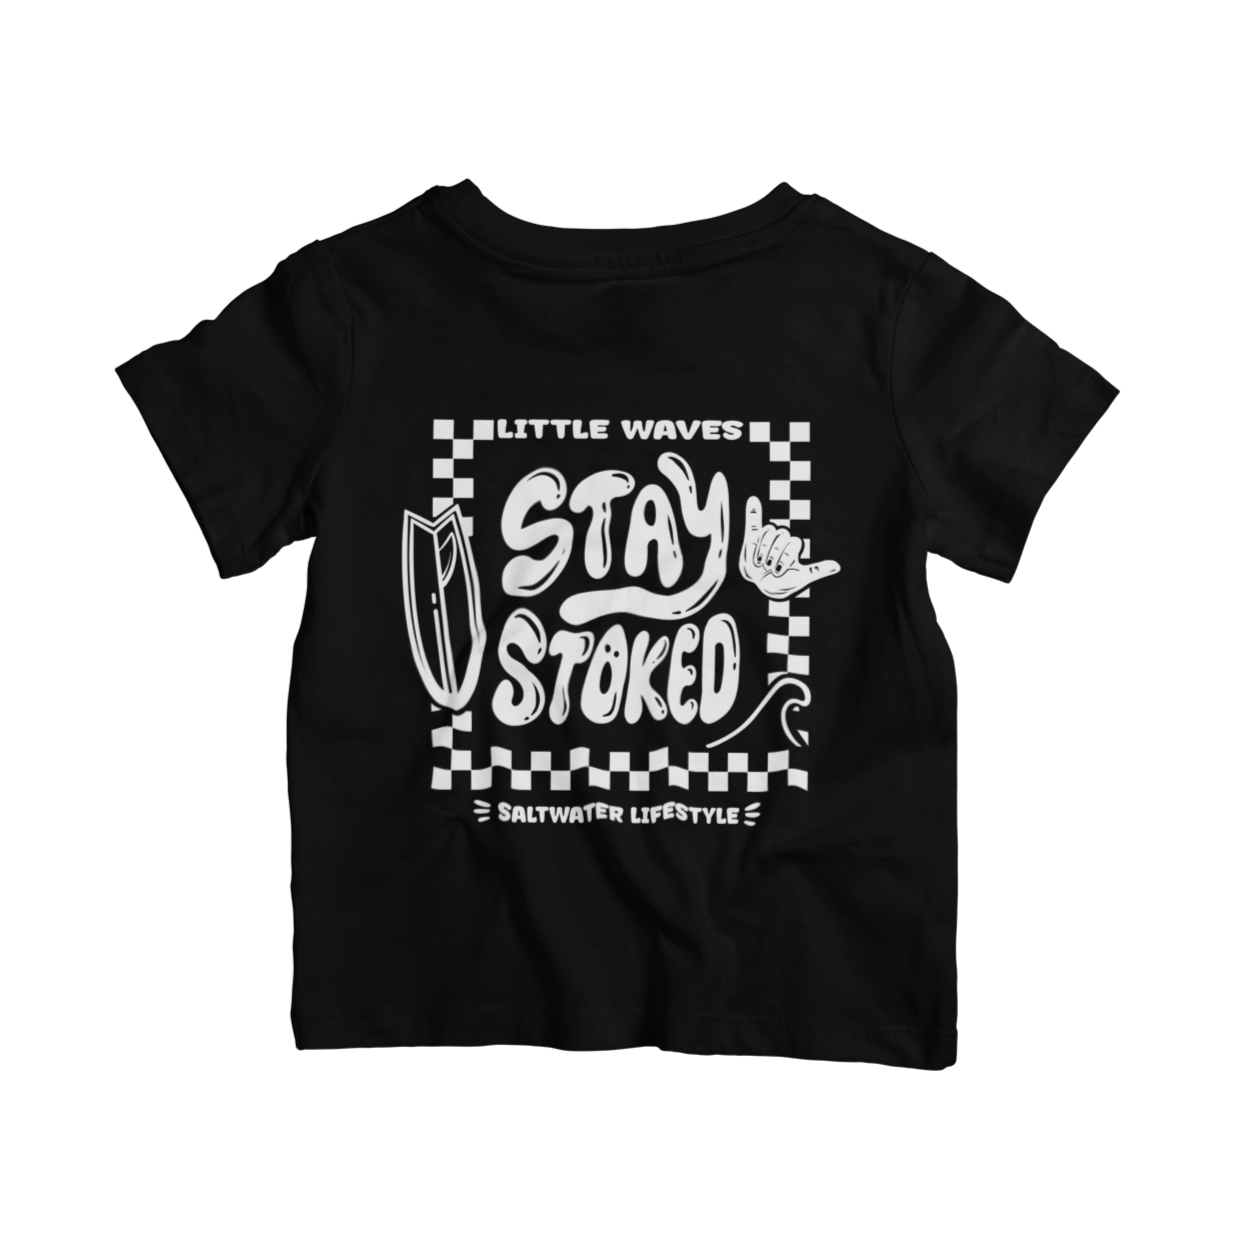 STAY STOKED~ Black